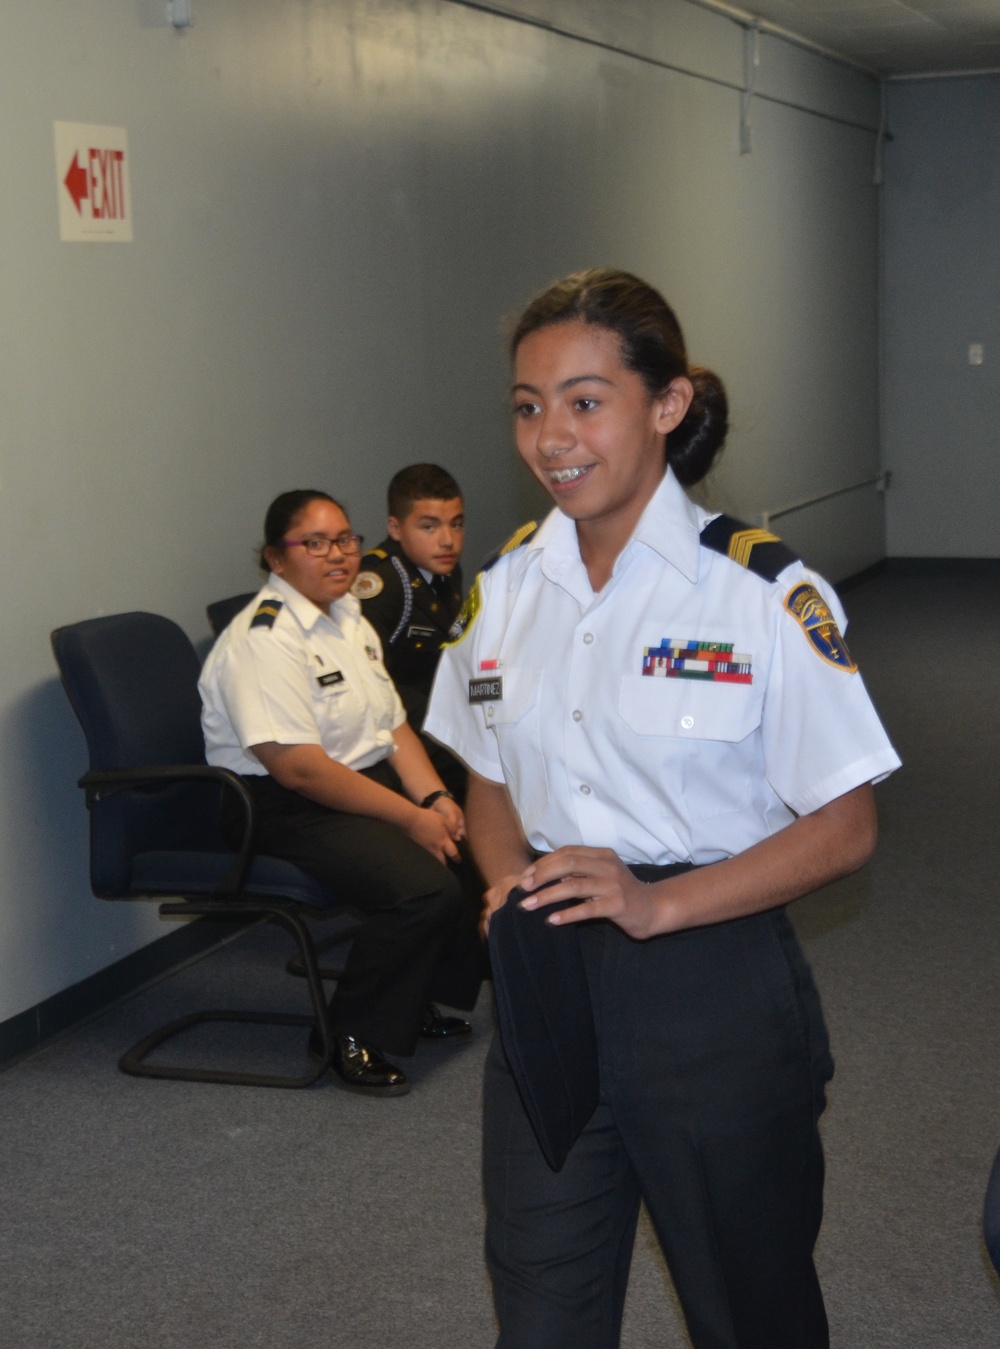 Cadet Corps showcases future of California: State competition brings youth leaders to JFTB Los Alamitos